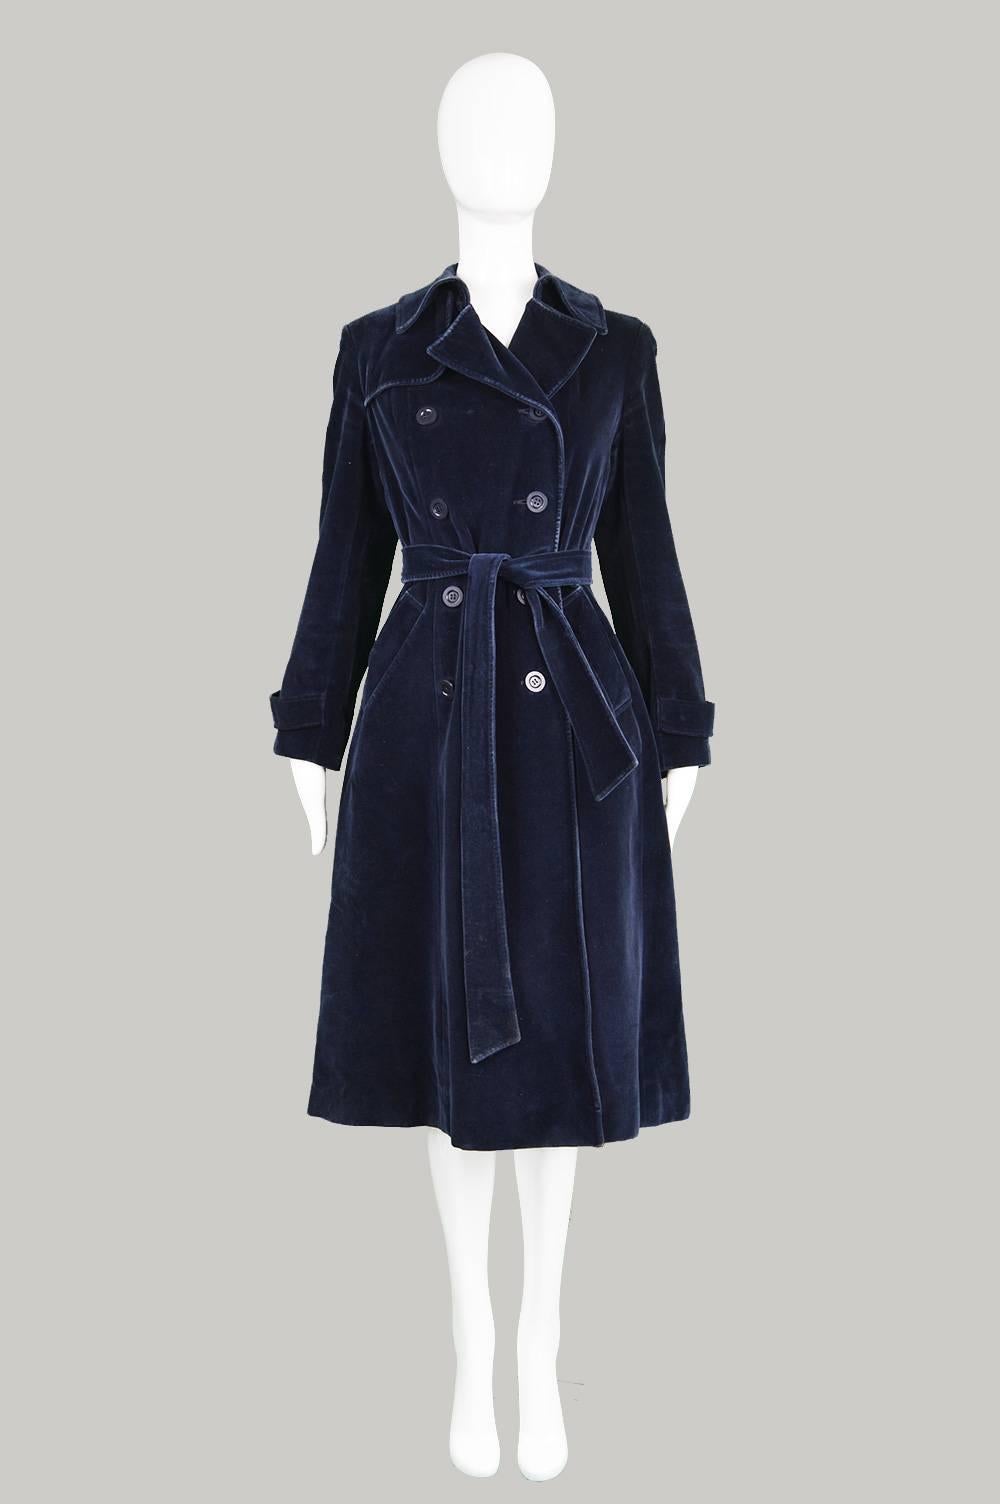 A timeless vintage women's peacoat from the 1970's in a deep blue velvet by Aquascutum of London.

Estimated Size: Small to Medium
Bust - 38” / 96cm (Remember to leave a few inches room for movement and clothes underneath)
Waist - up to 34” /